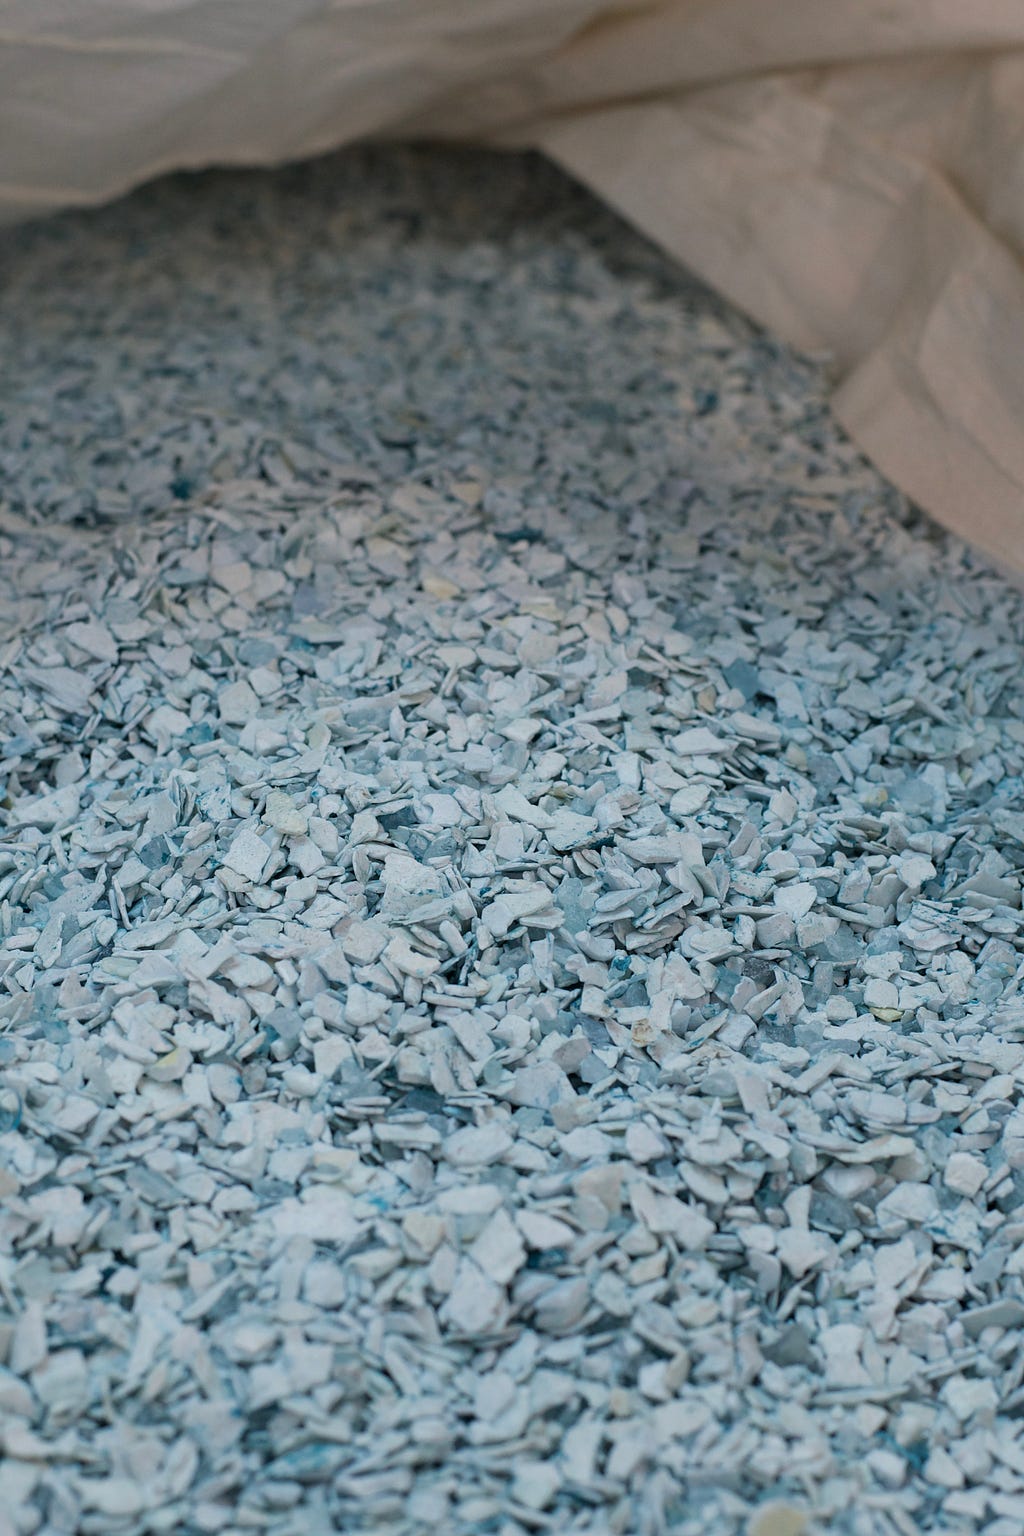 Raw form of the recycled plastics that will become the Heron collection CREDIT Smile Plastics